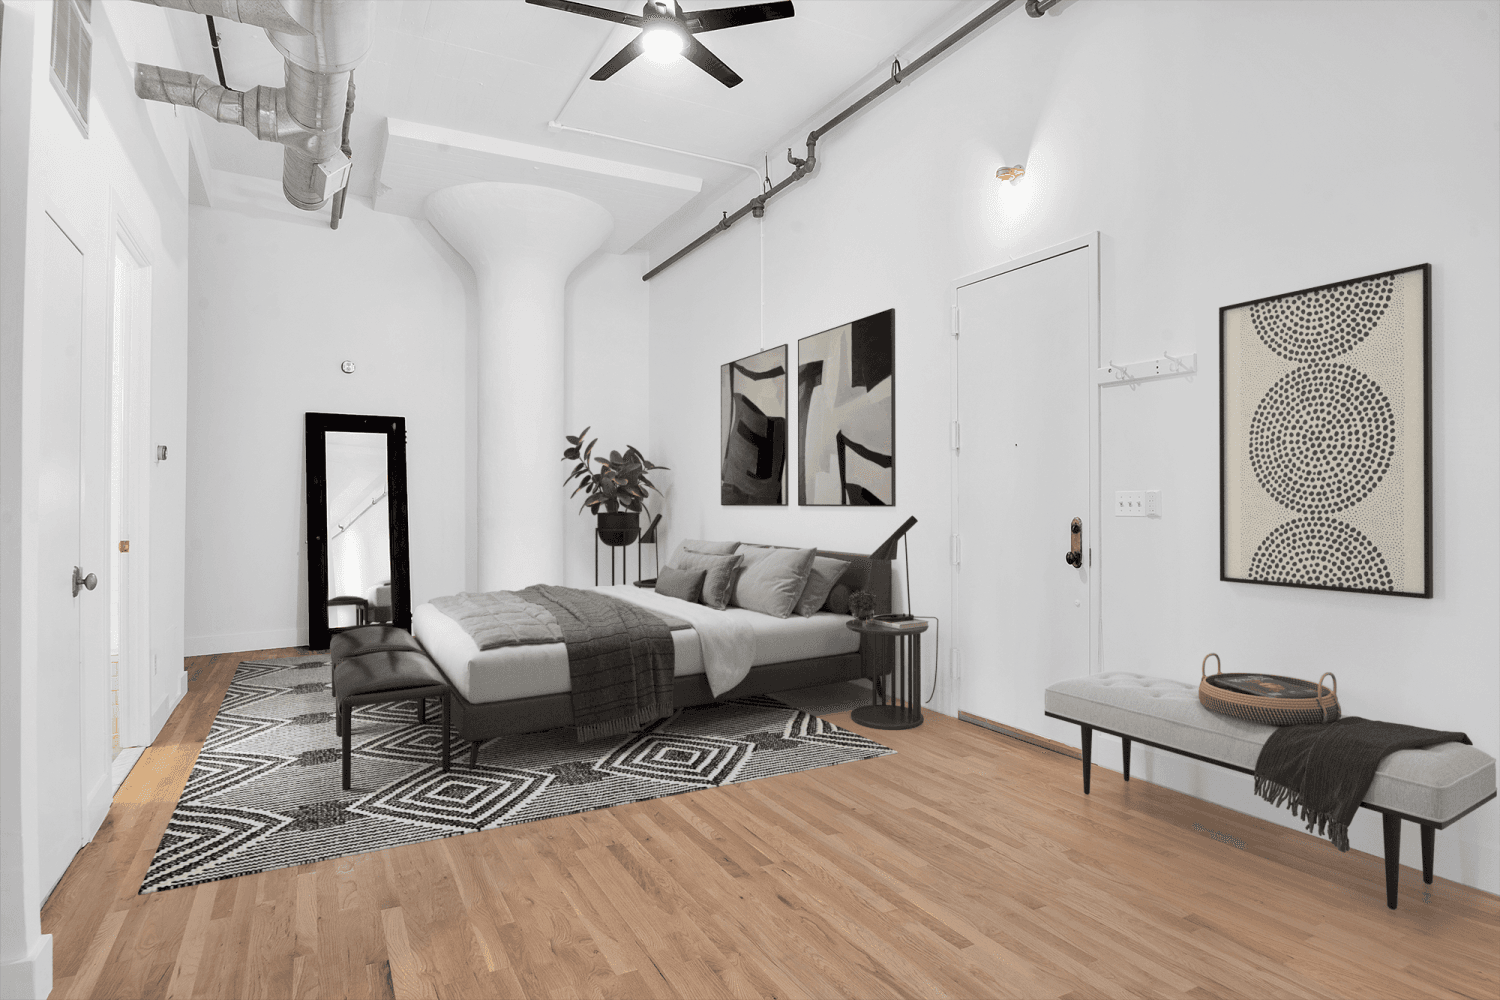 Luxe Loft LivingEnter into the epitome of urban luxury with this meticulously designed 13 ft loft located on the border of Clinton Hill and Bedford Stuyvesant, now available for rent.